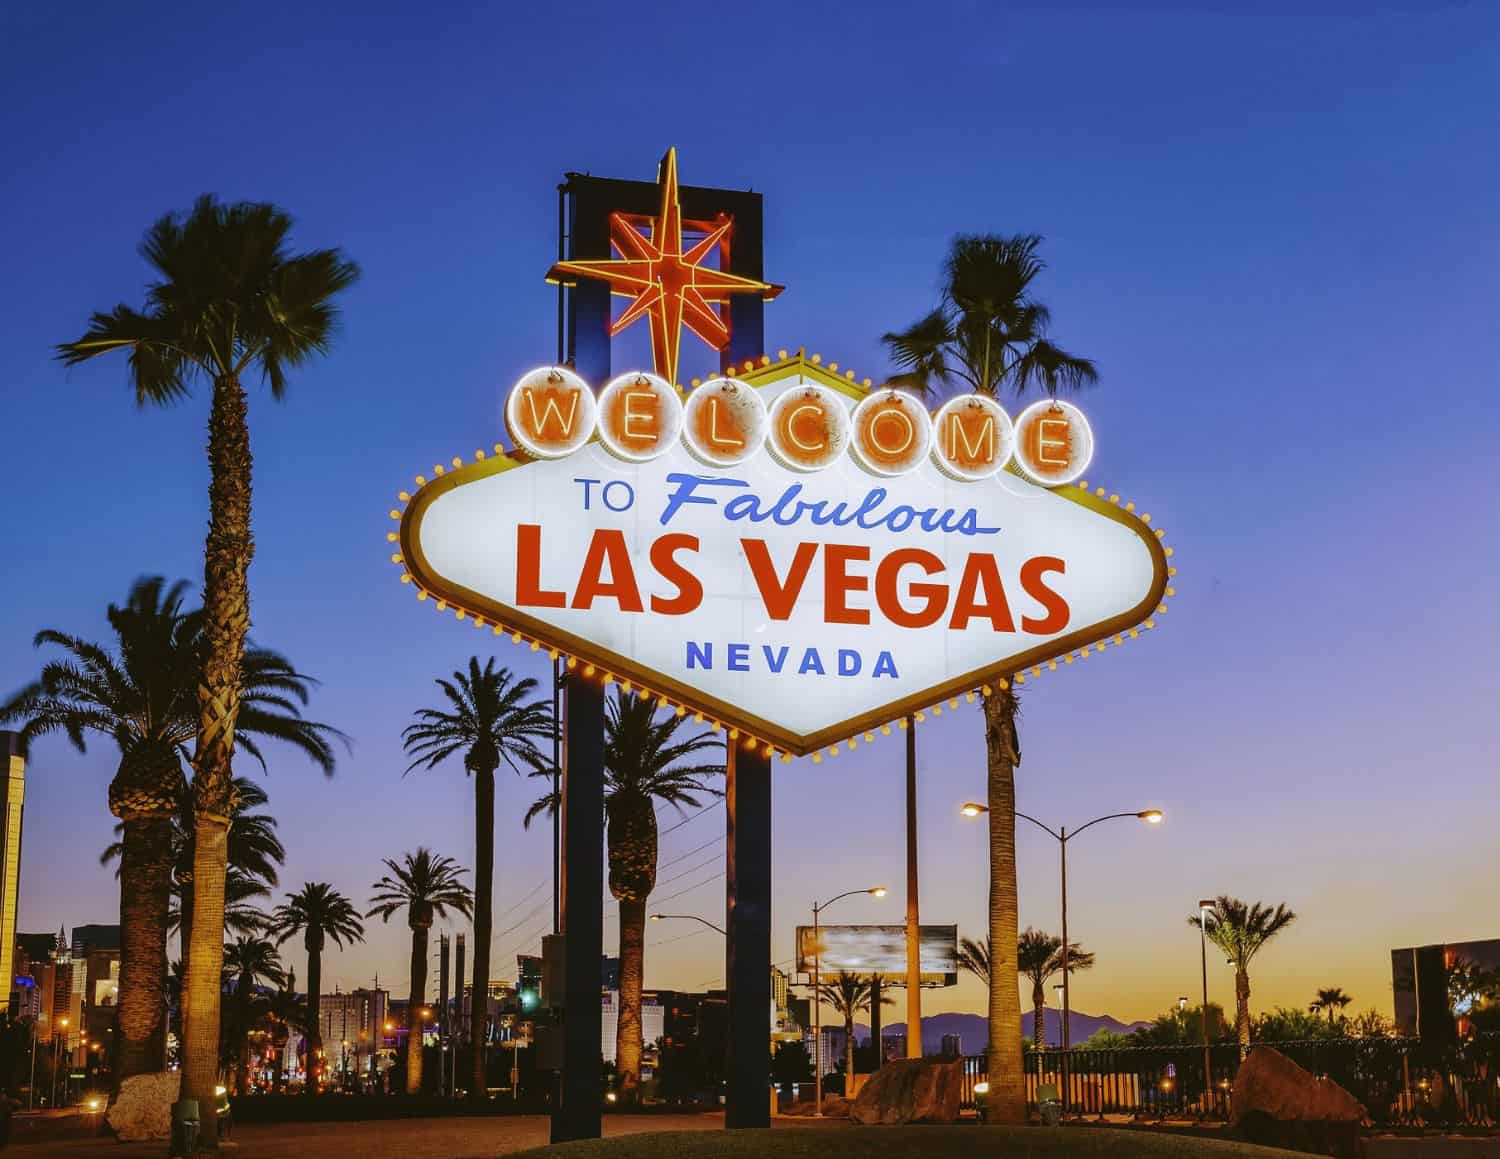 The Worst Hotels In Las Vegas For Bed Bugs A Comprehensive Guide